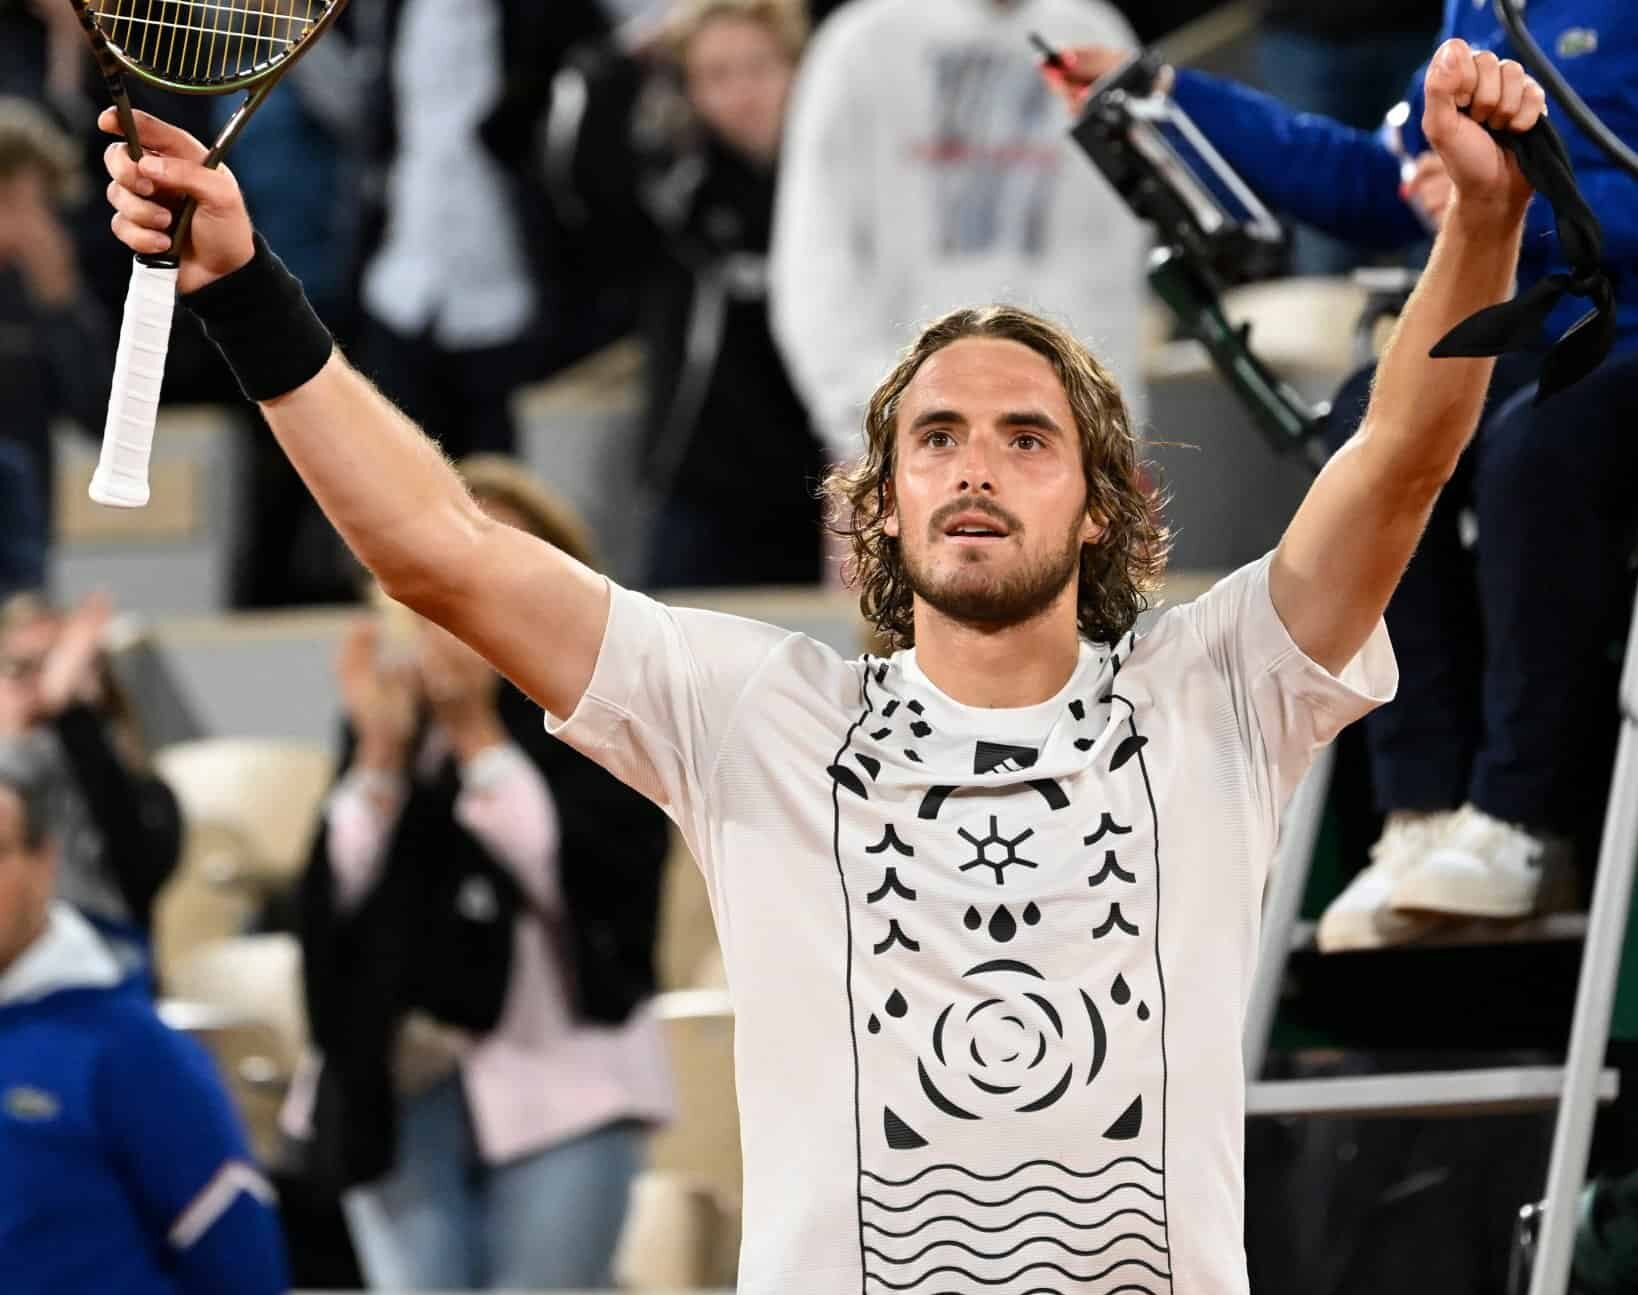 Stefanos Tsitsipas overcomes two sets to love deficit to defeat Musetti and reach round 2 22